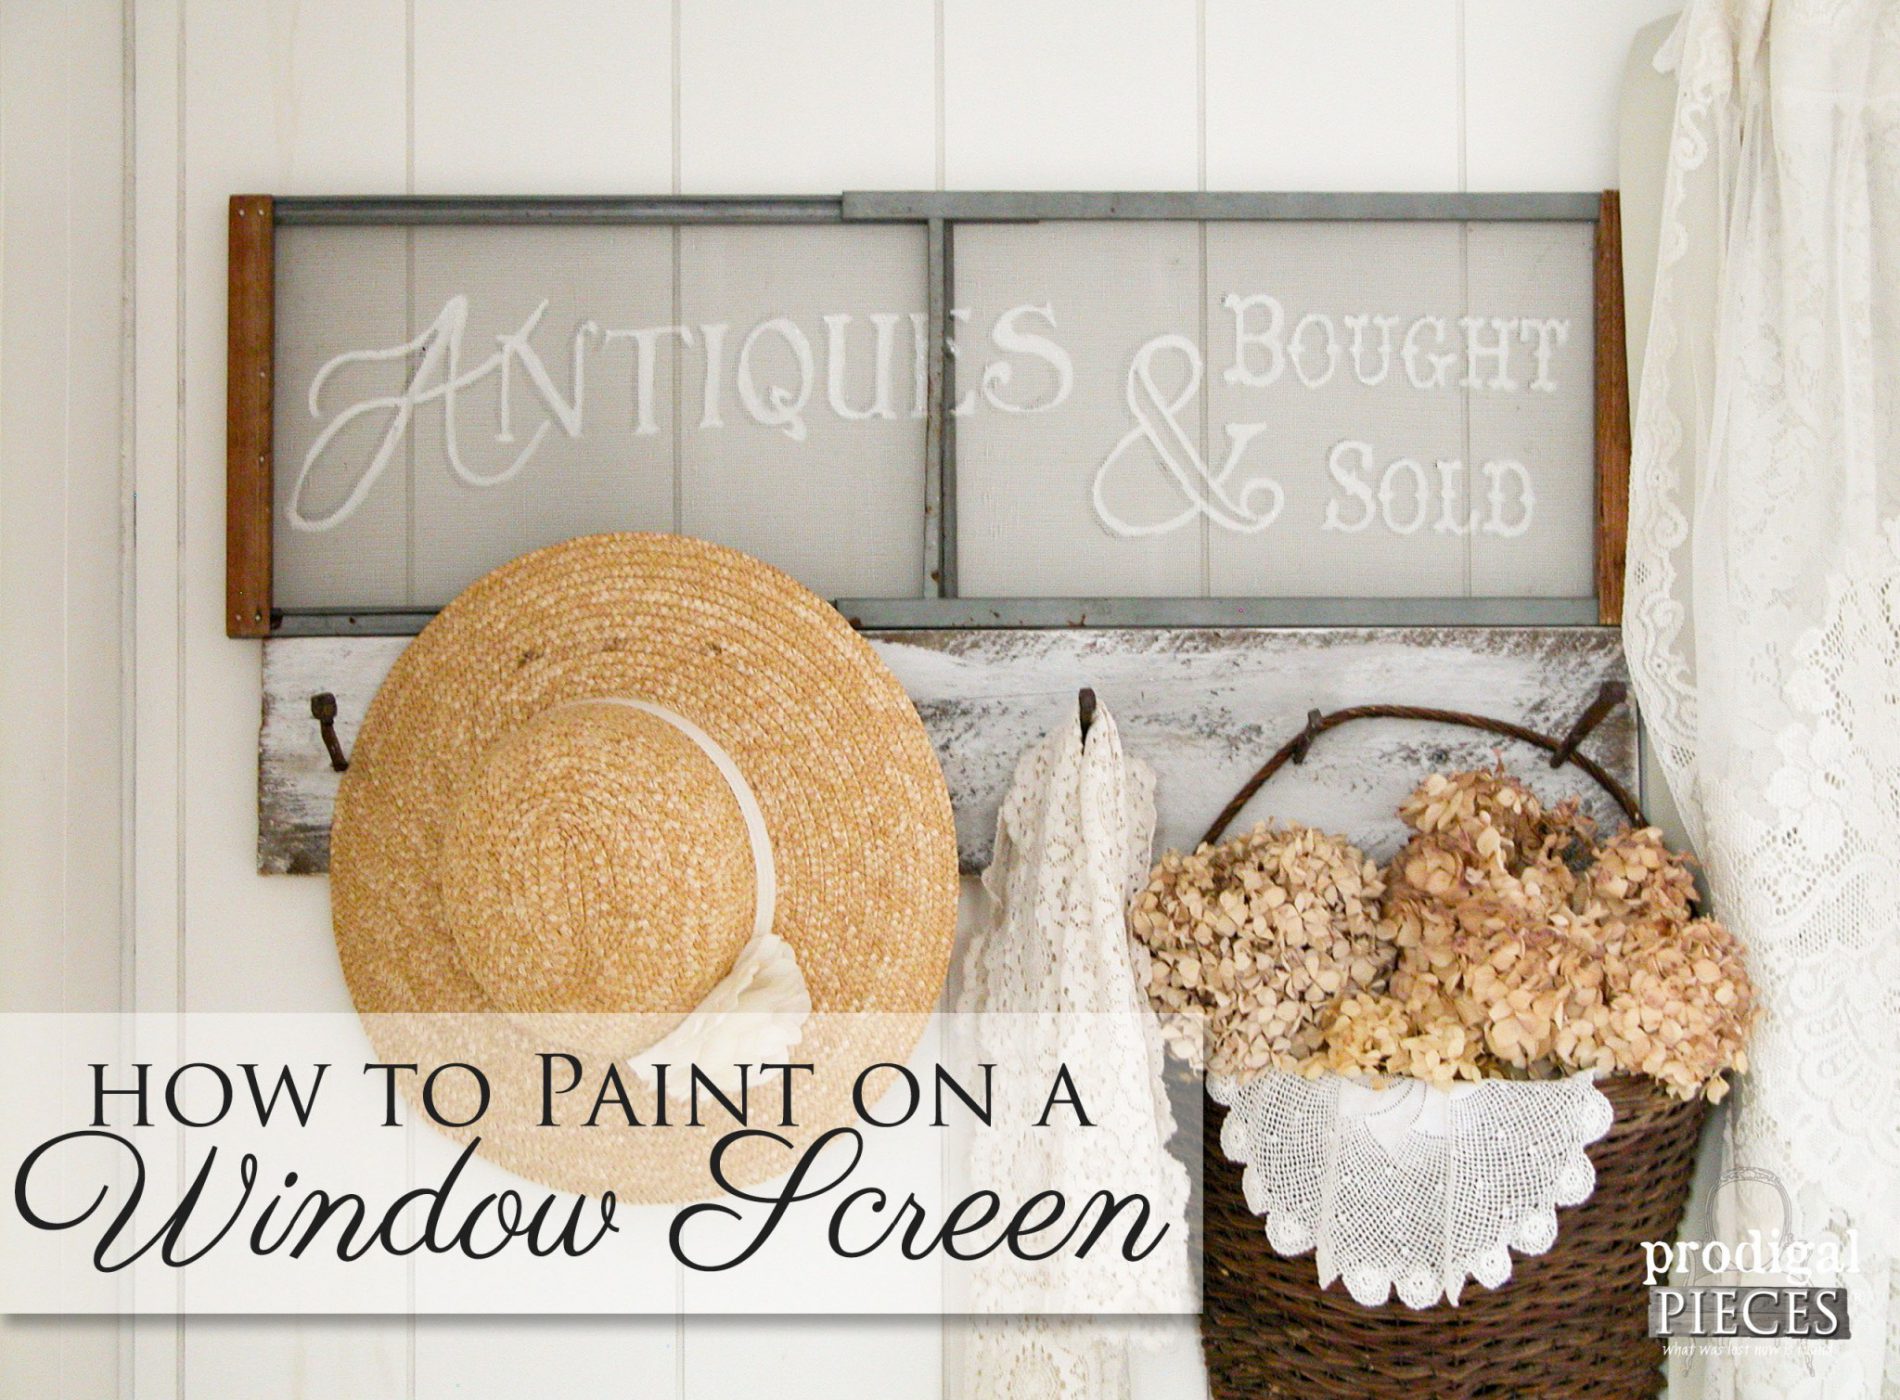 How to Paint on a Window Screen | Prodigal Pieces | www.prodigalpieces.com